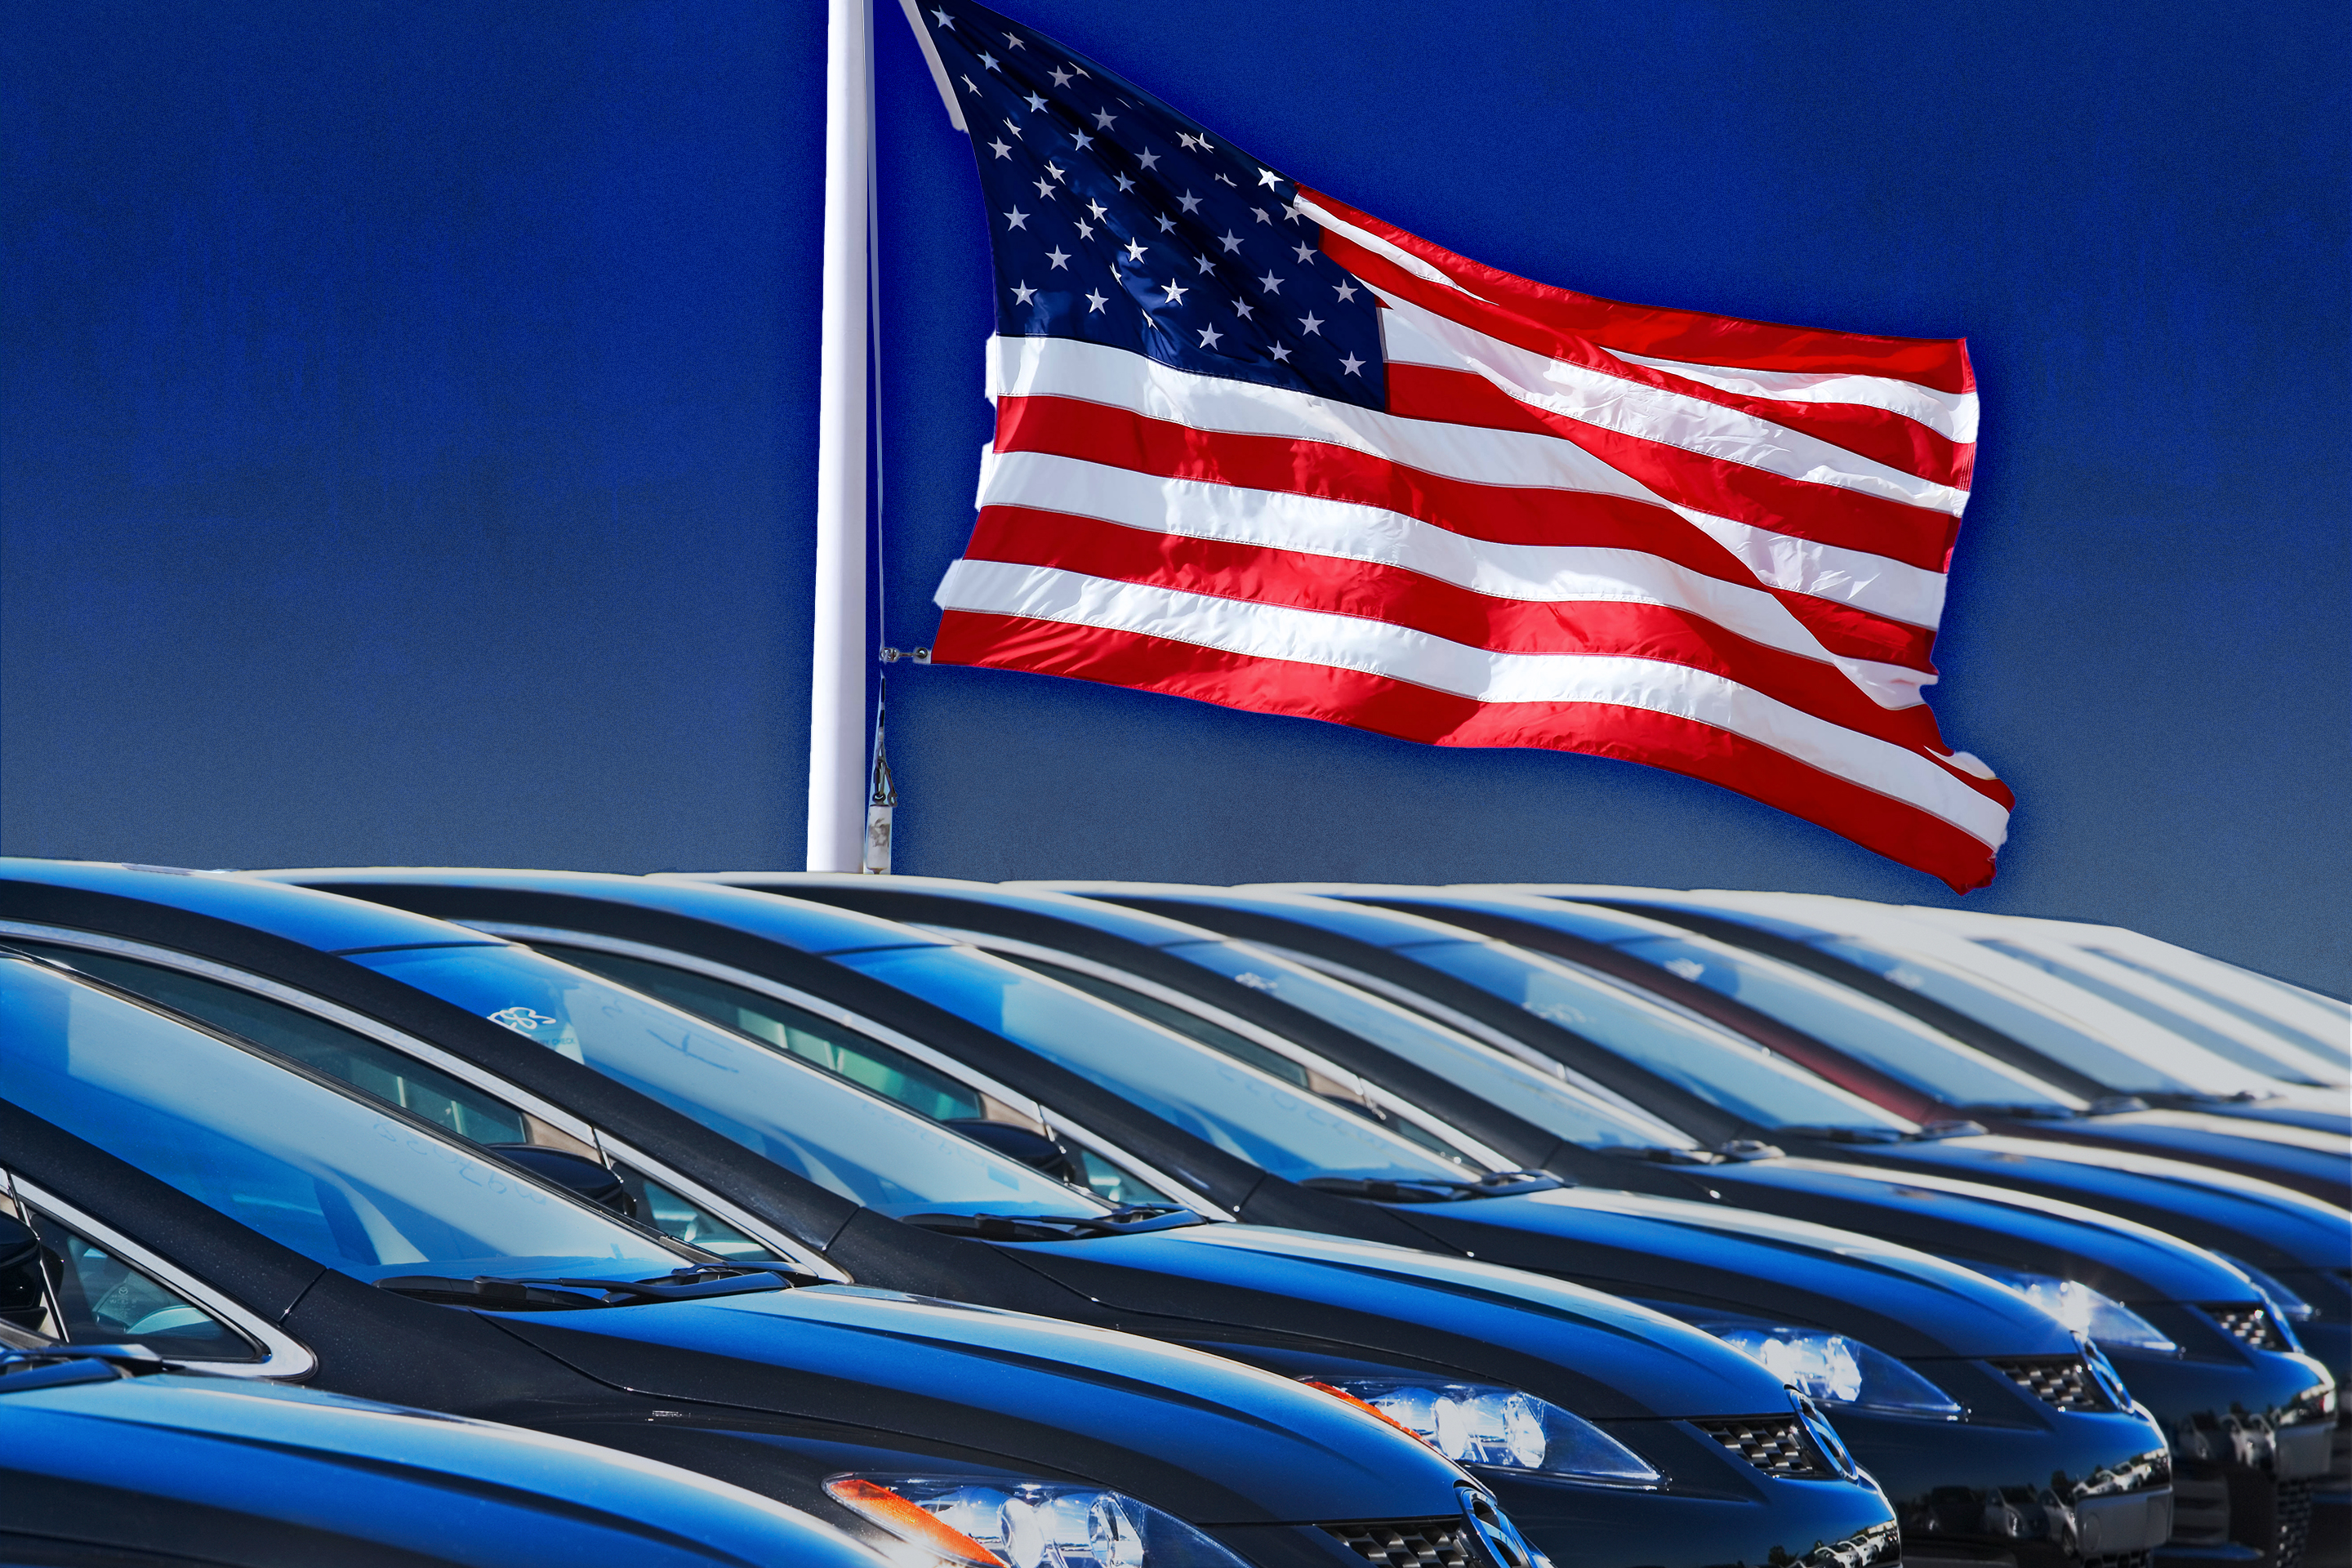 New Car Deals: Is Memorial Day a Good Time to Buy a Car?